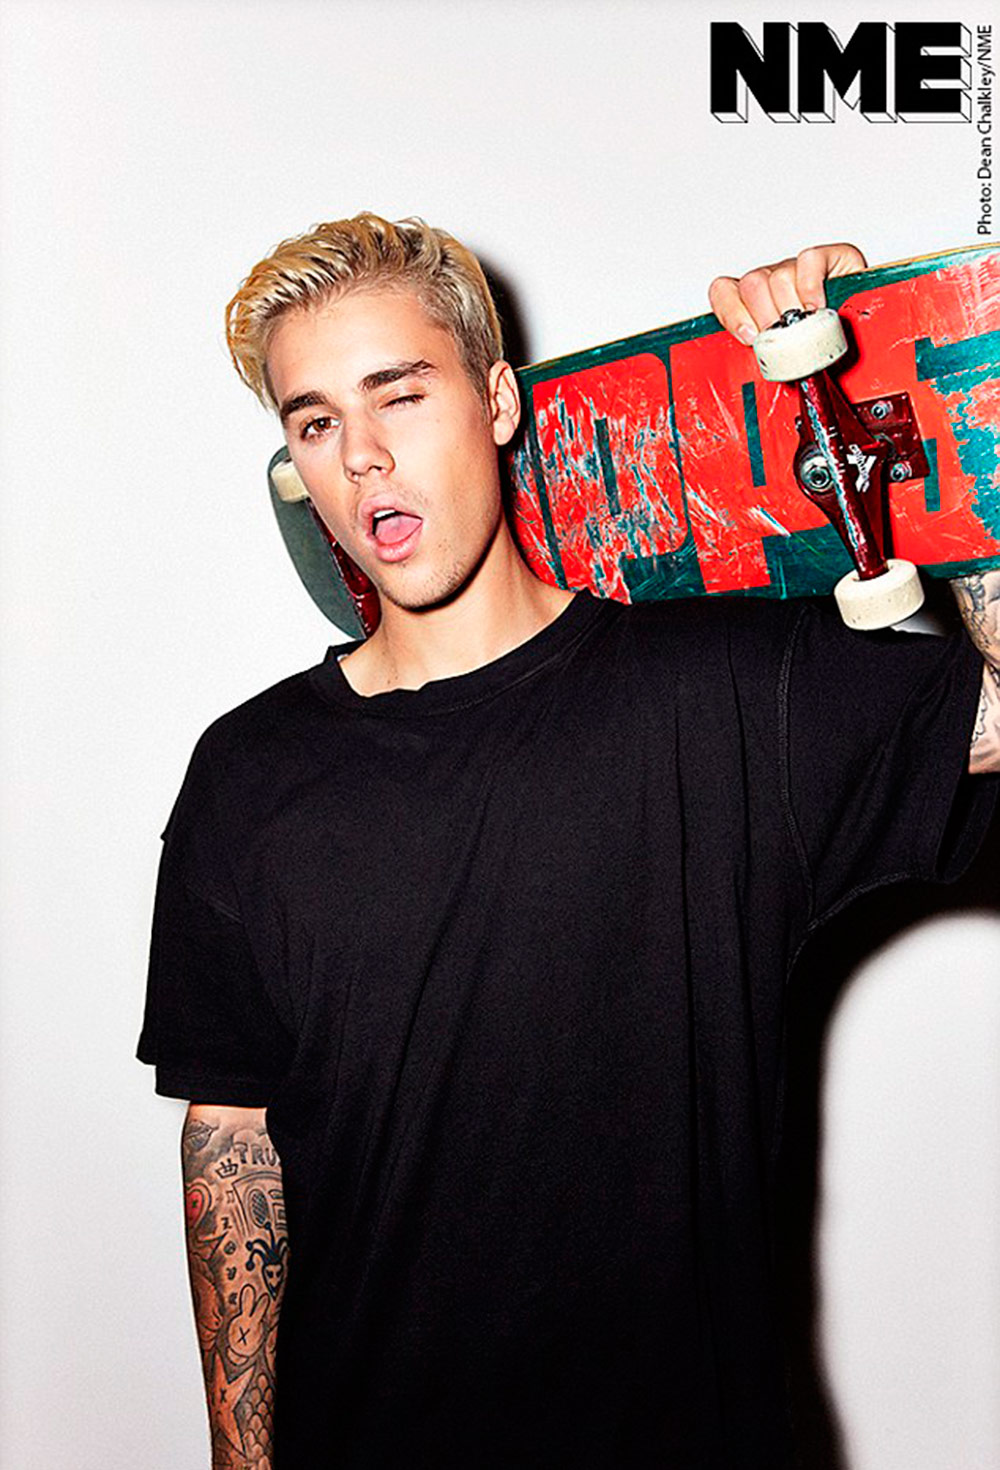  Justin  Bieber  Covers NME Talks Isolation of Being Famous